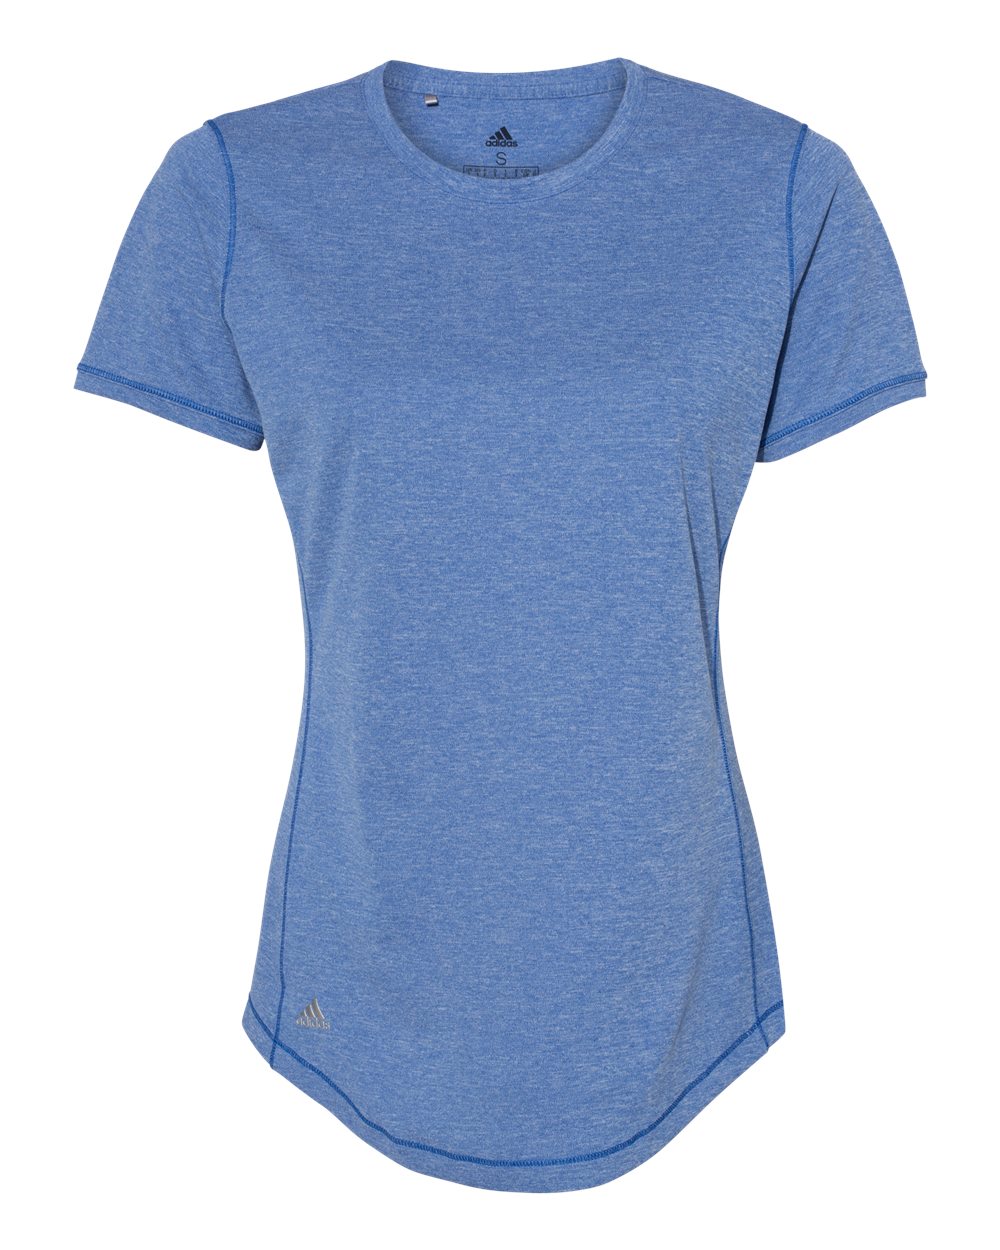 click to view Collegiate Royal Heather